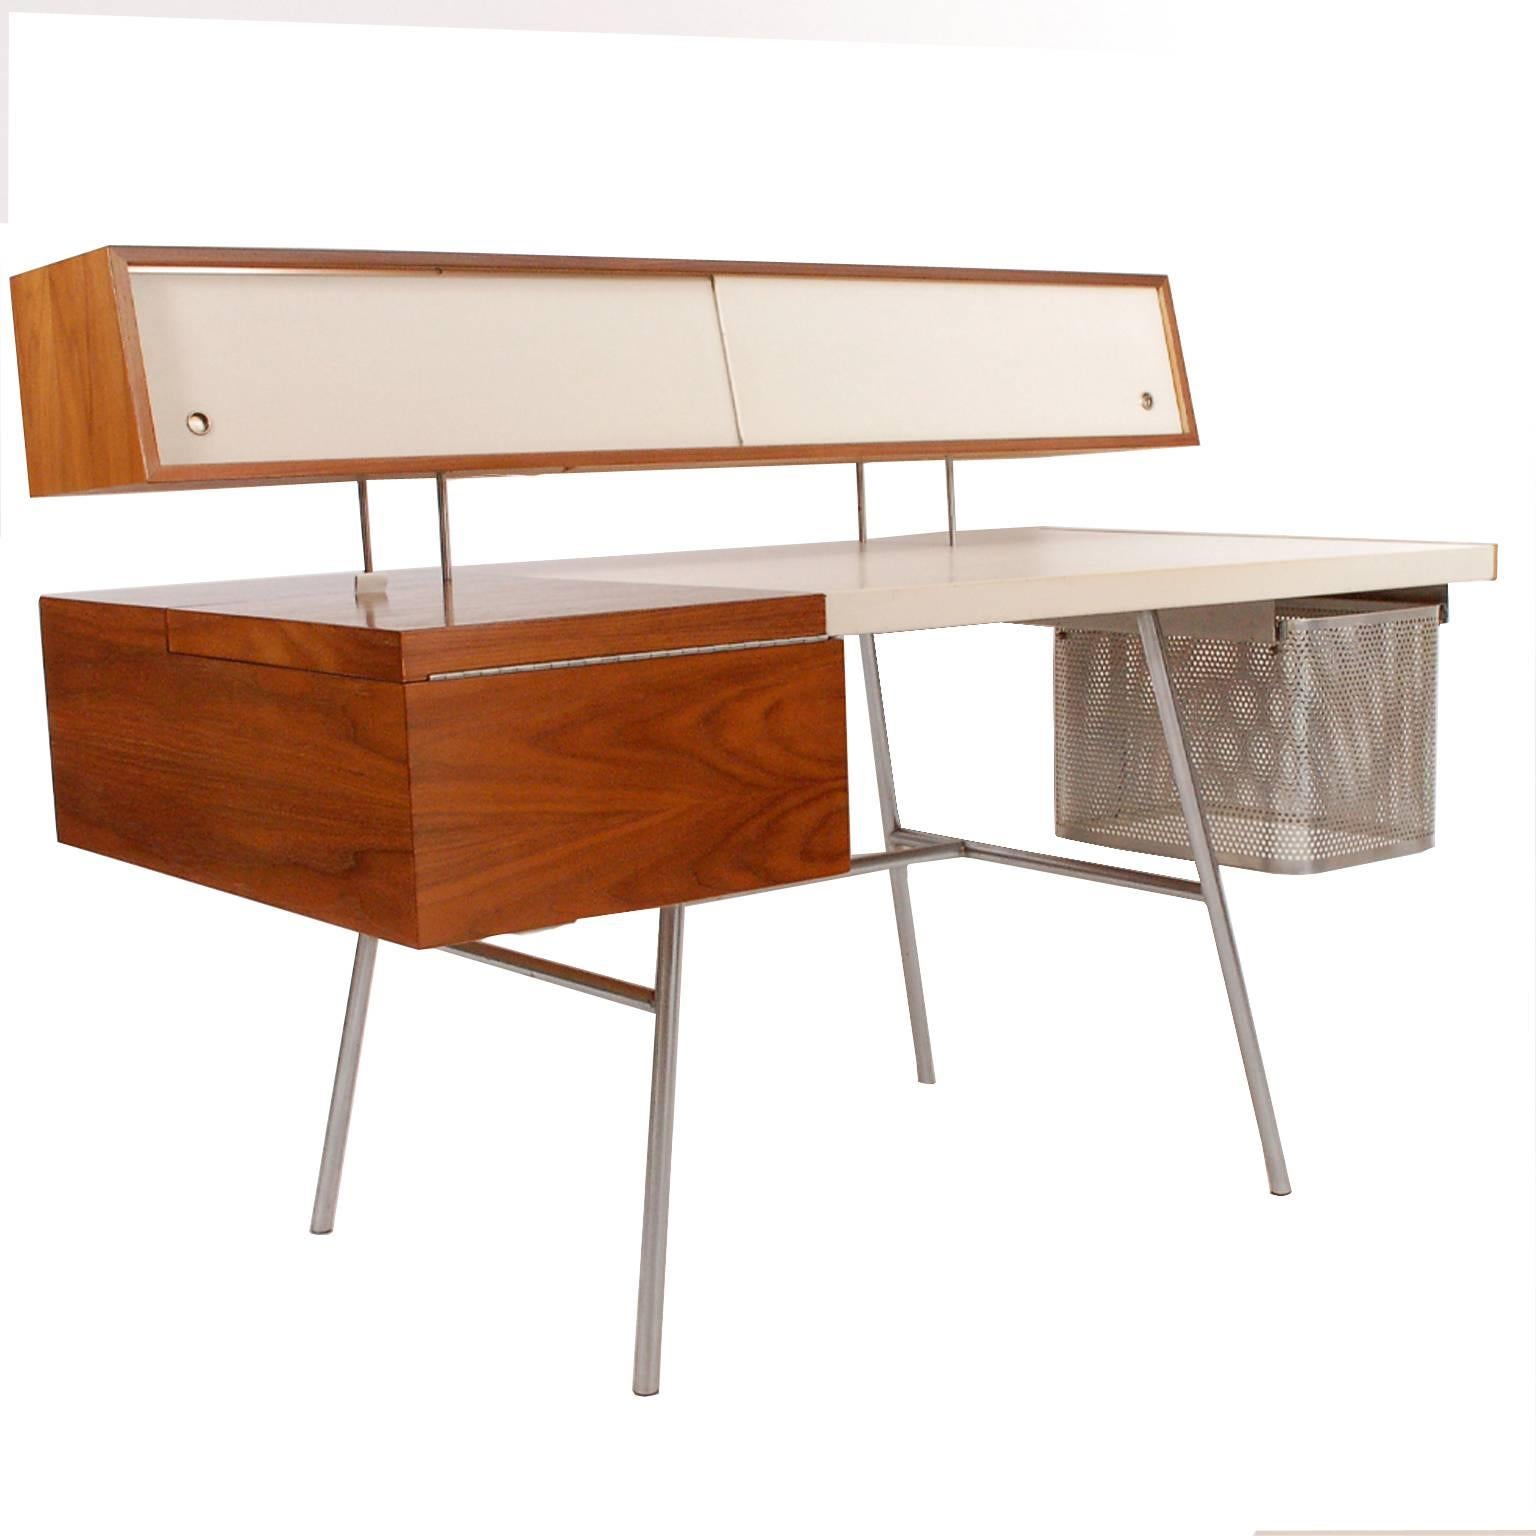 Walnut with original custom white leather writing surface and sliding floating doors, small drawers in maple. Storage and drop down typing table with original perforated aluminum file drawer. On aluminum legs. Made by Herman Miller.